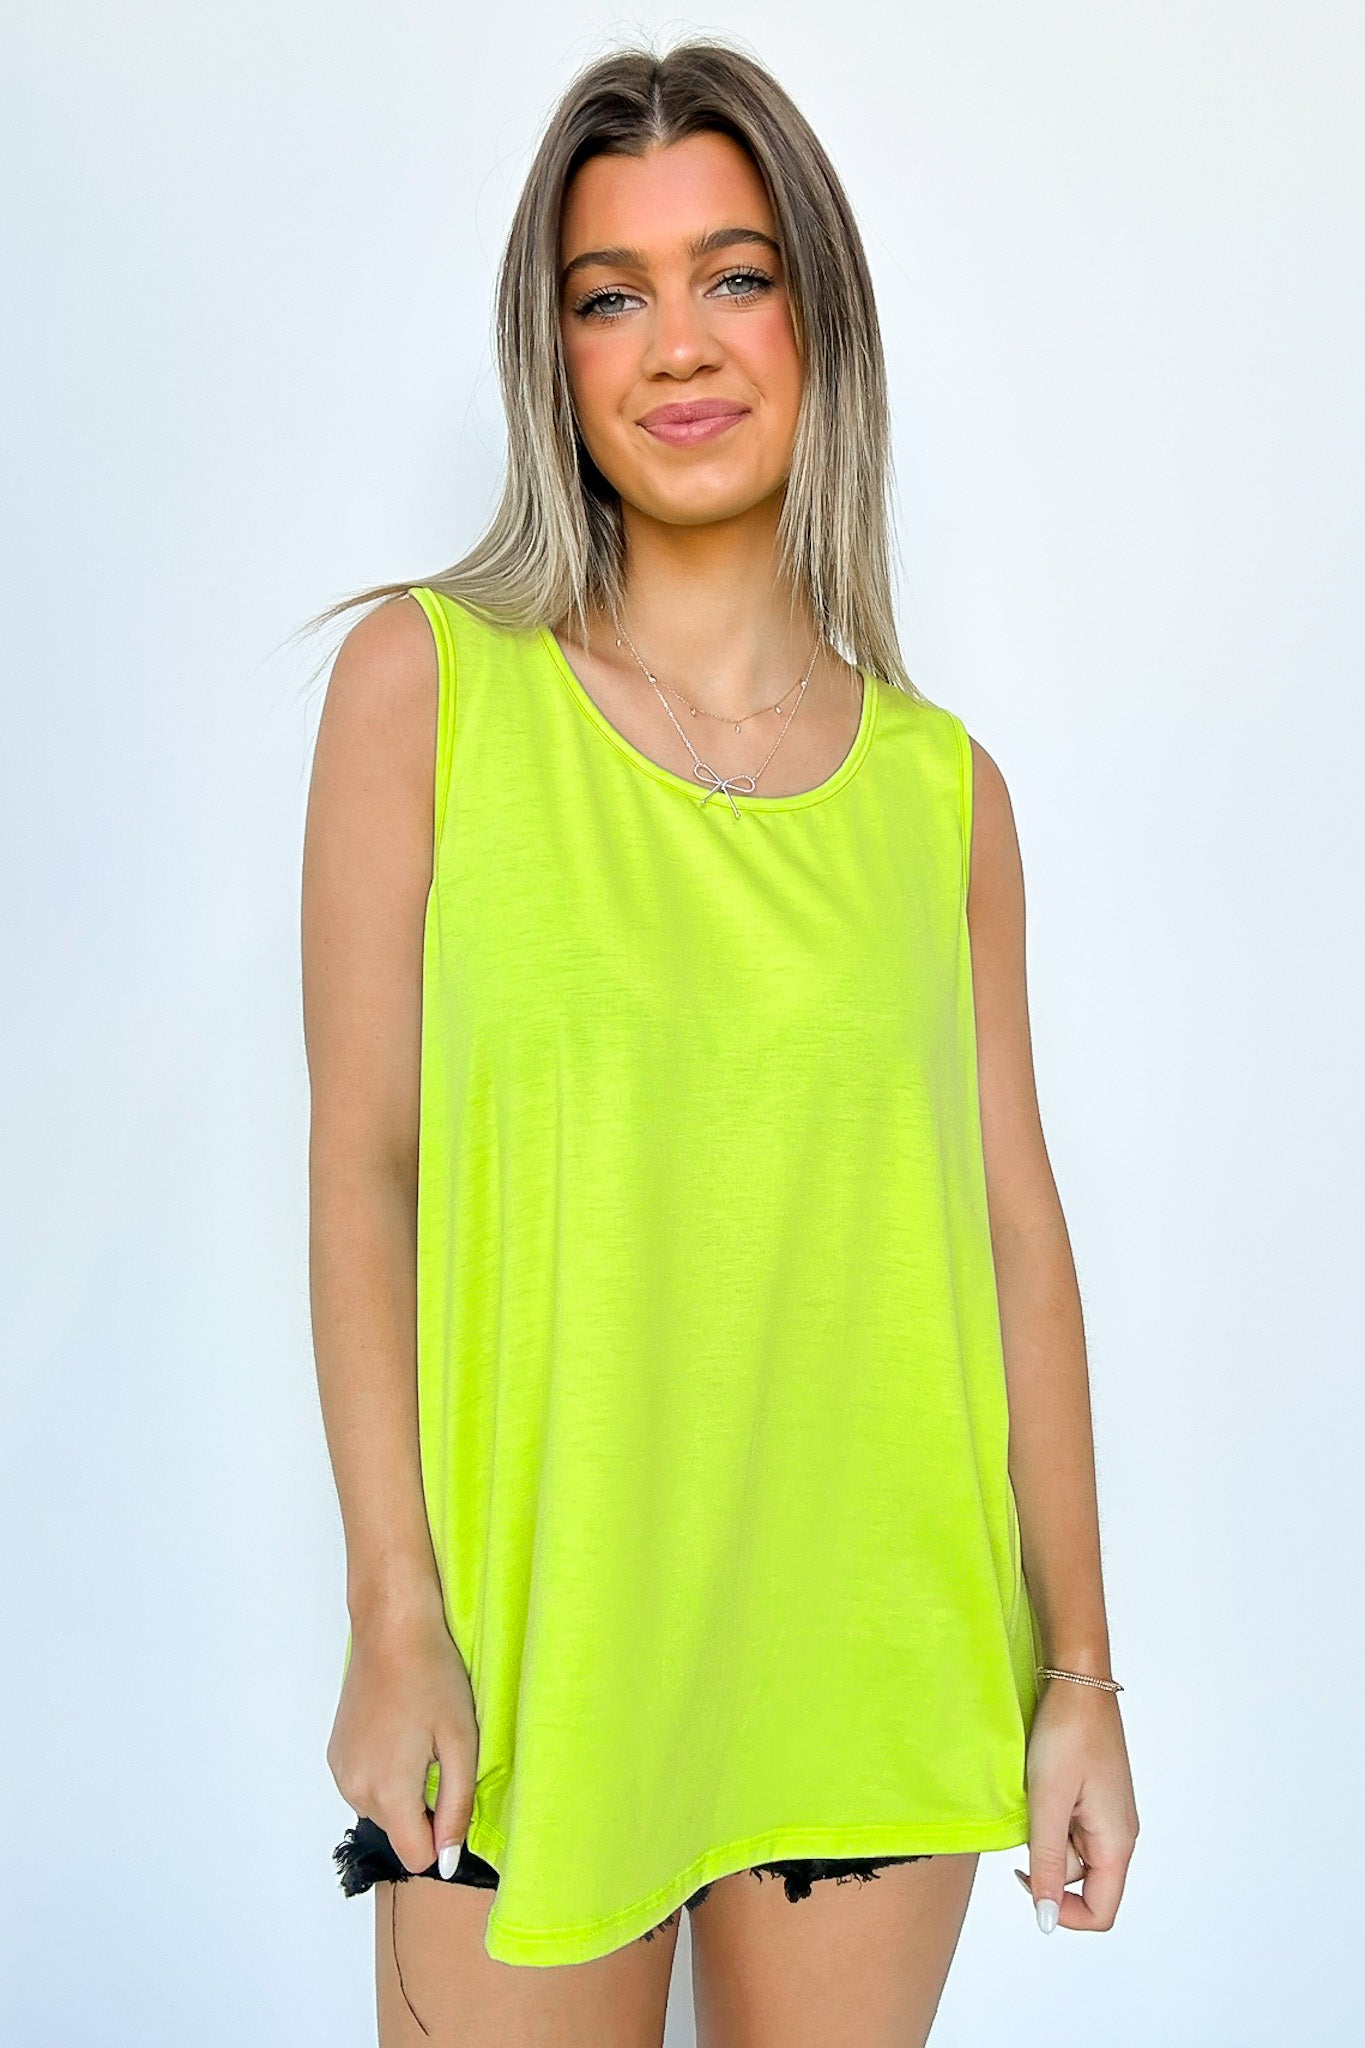  Russo Flowy Tank Top - Madison and Mallory